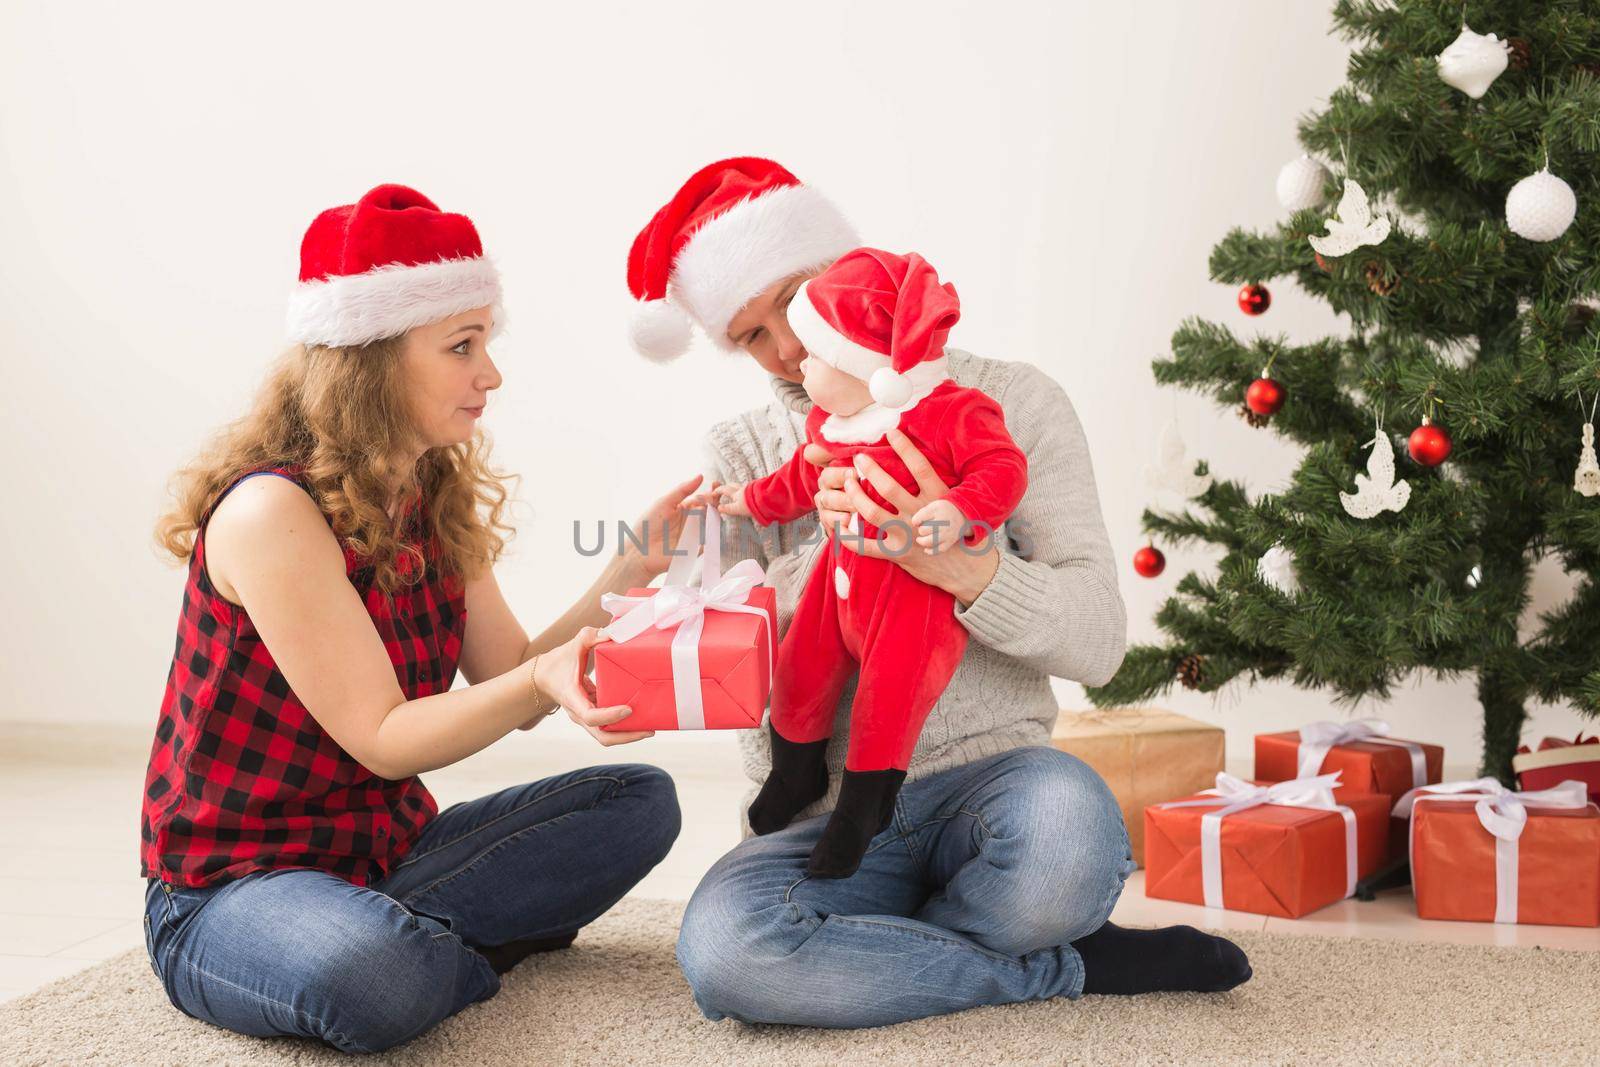 Happy couple with baby celebrating Christmas together at home. by Satura86